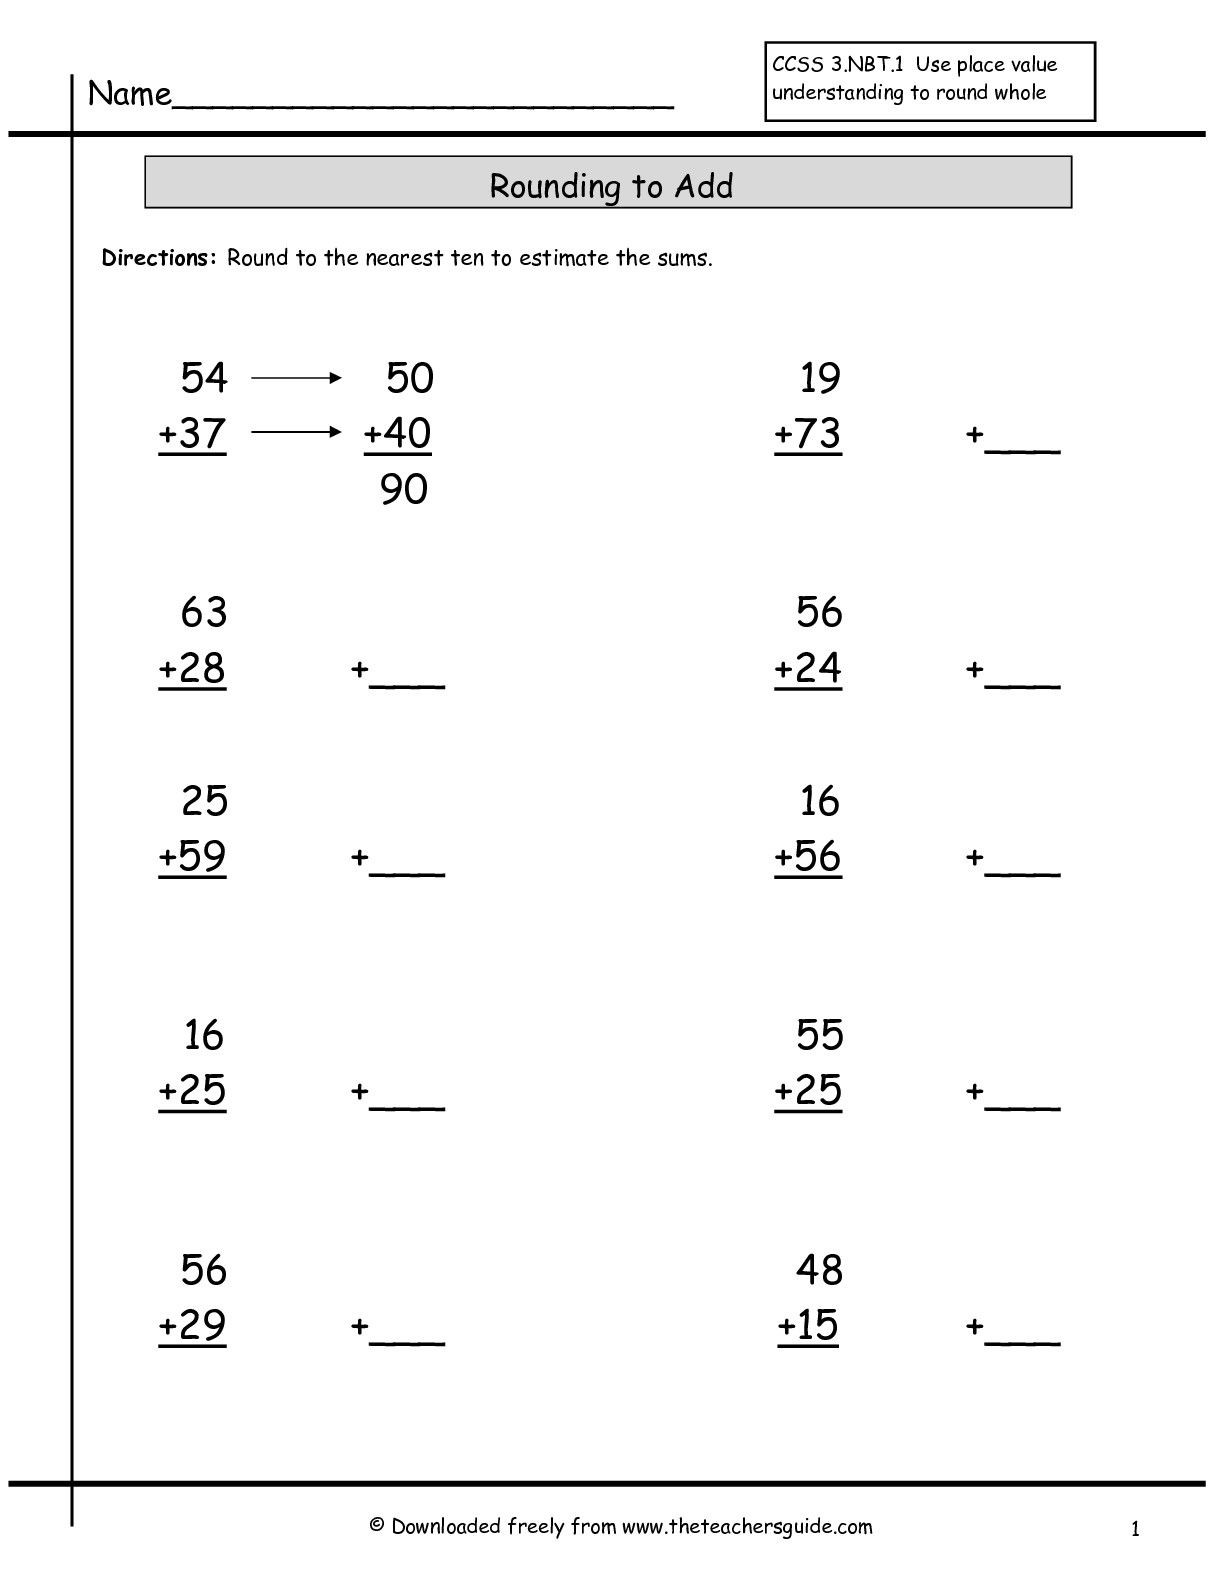 Estimation Worksheets for 3rd Grade Rounding to Estimate the Sum Worksheet